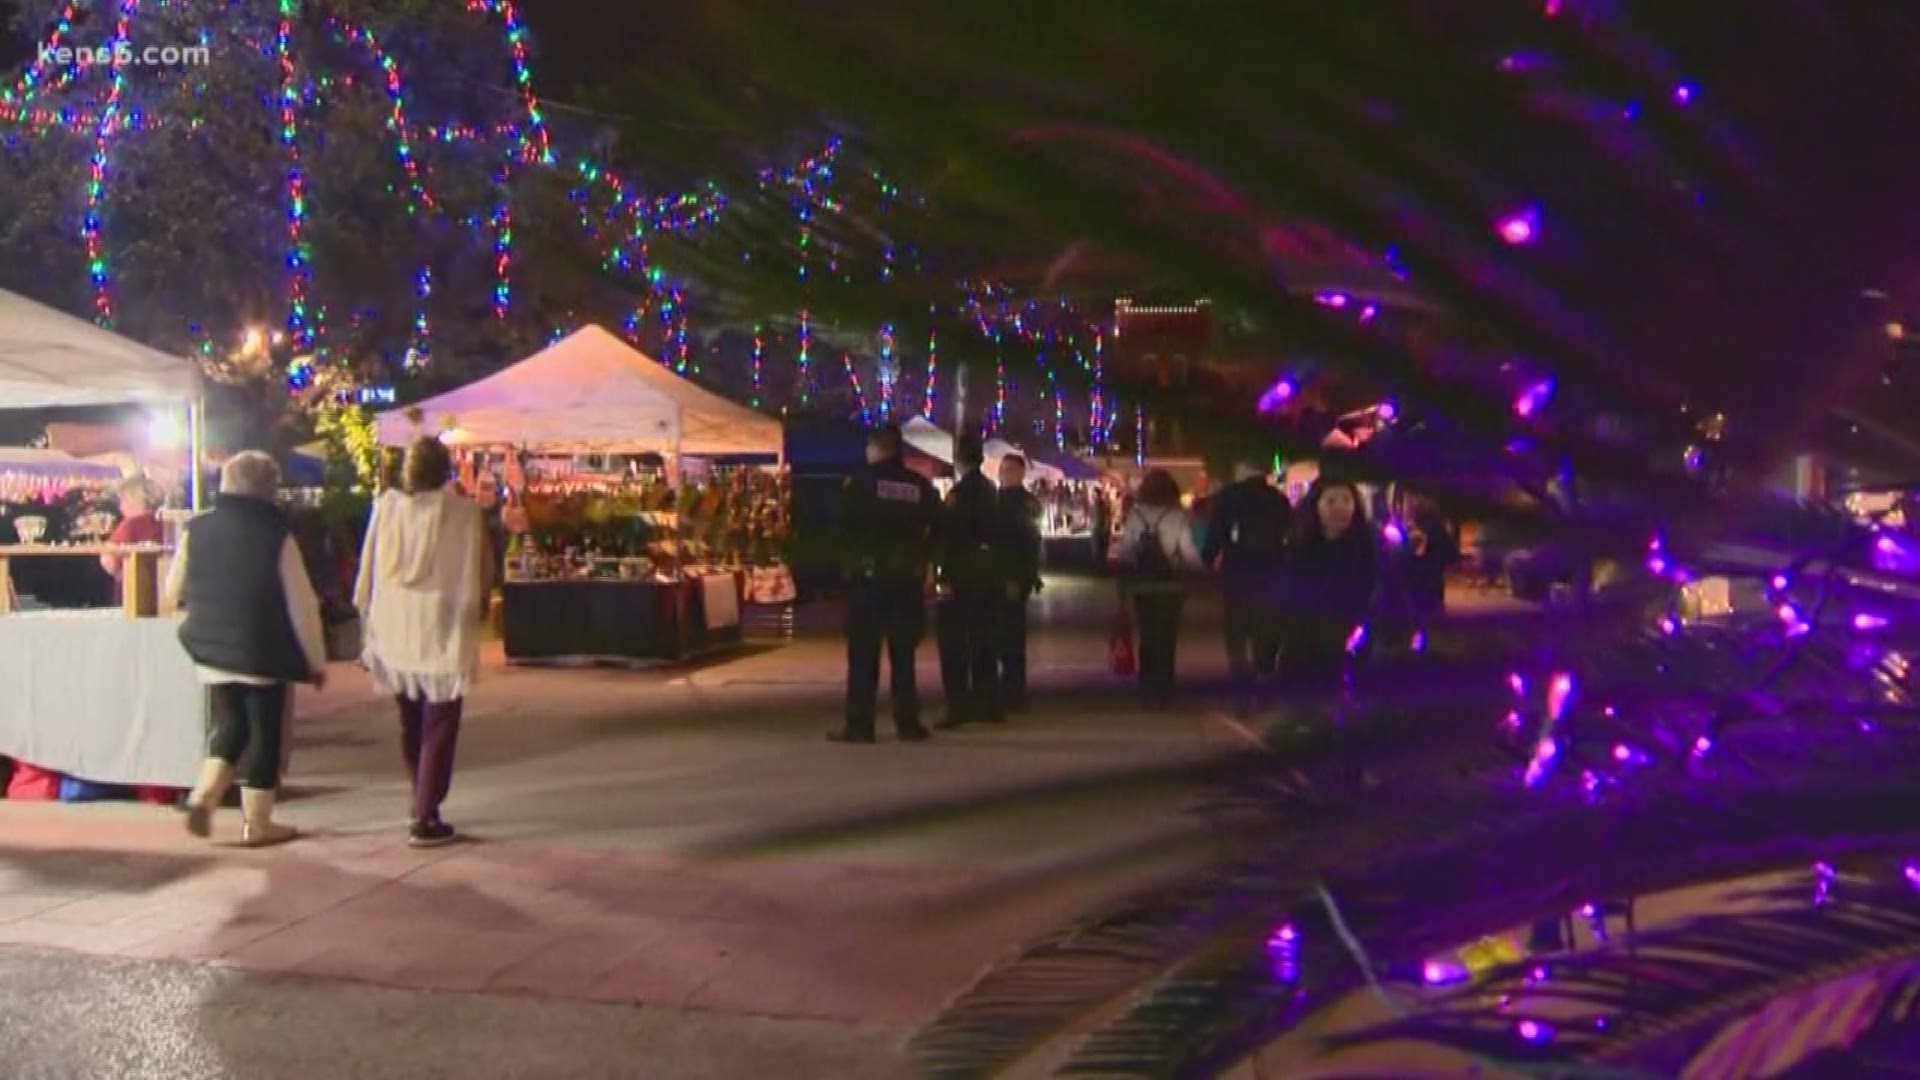 Food, fun and fireworks: People from all over the world came together to celebrate New Year's Eve in downtown San Antonio.